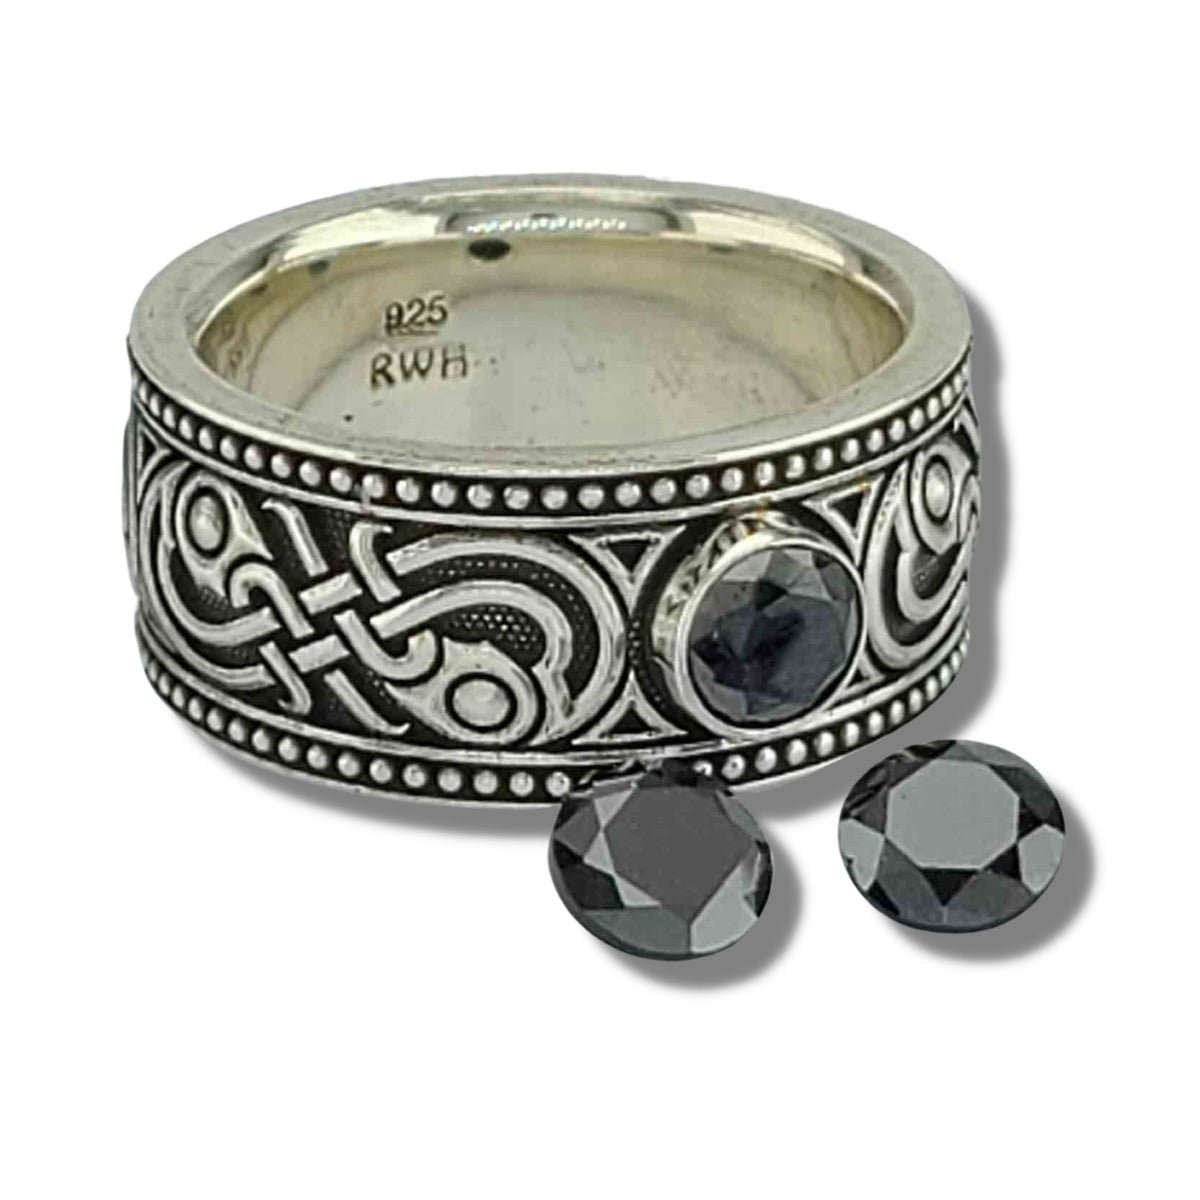 NORSE COLLECTION RING #3 with BLACK DIAMOND - Starting at $459 - Celtic Jewelscapes